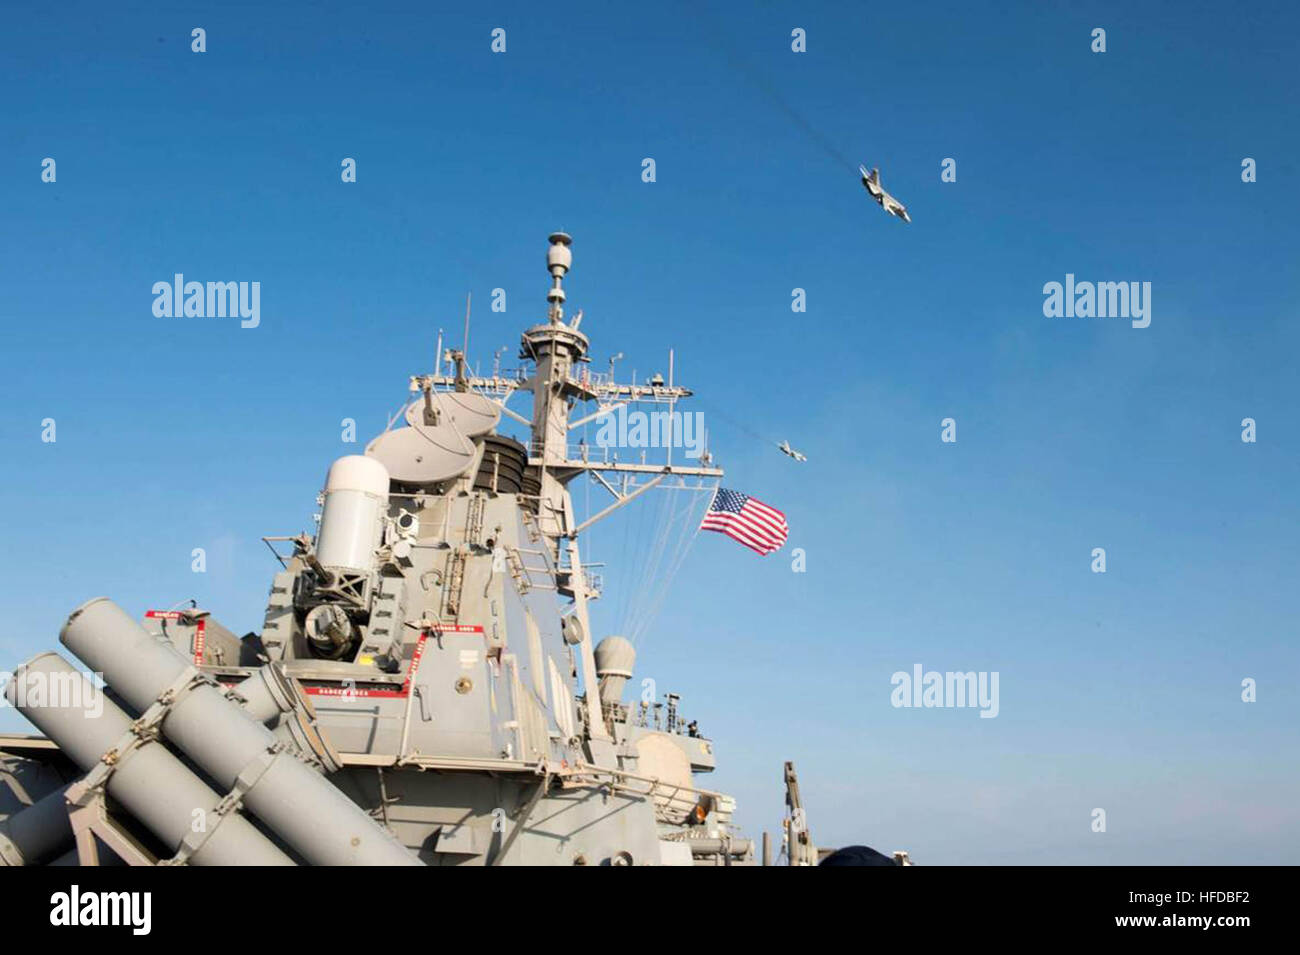 160412-N-00000-009 BALTIC SEA – Two Russian Sukhoi Su-24 attack aircraft fly over the USS Donald Cook (DDG 75) Apr. 12, 2016. Donald Cook, an Arleigh Burke-class guided-missile destroyer, forward deployed to Rota, Spain is conducting a routine patrol in the U.S. 6th Fleet area of operations in support of U.S. national security interests in Europe. (U.S. Navy photo/Released) Two Russian Sukhoi Su-24 fly over the USS Donald Cook (DDG-75) - 160412-N-00000-009 Stock Photo